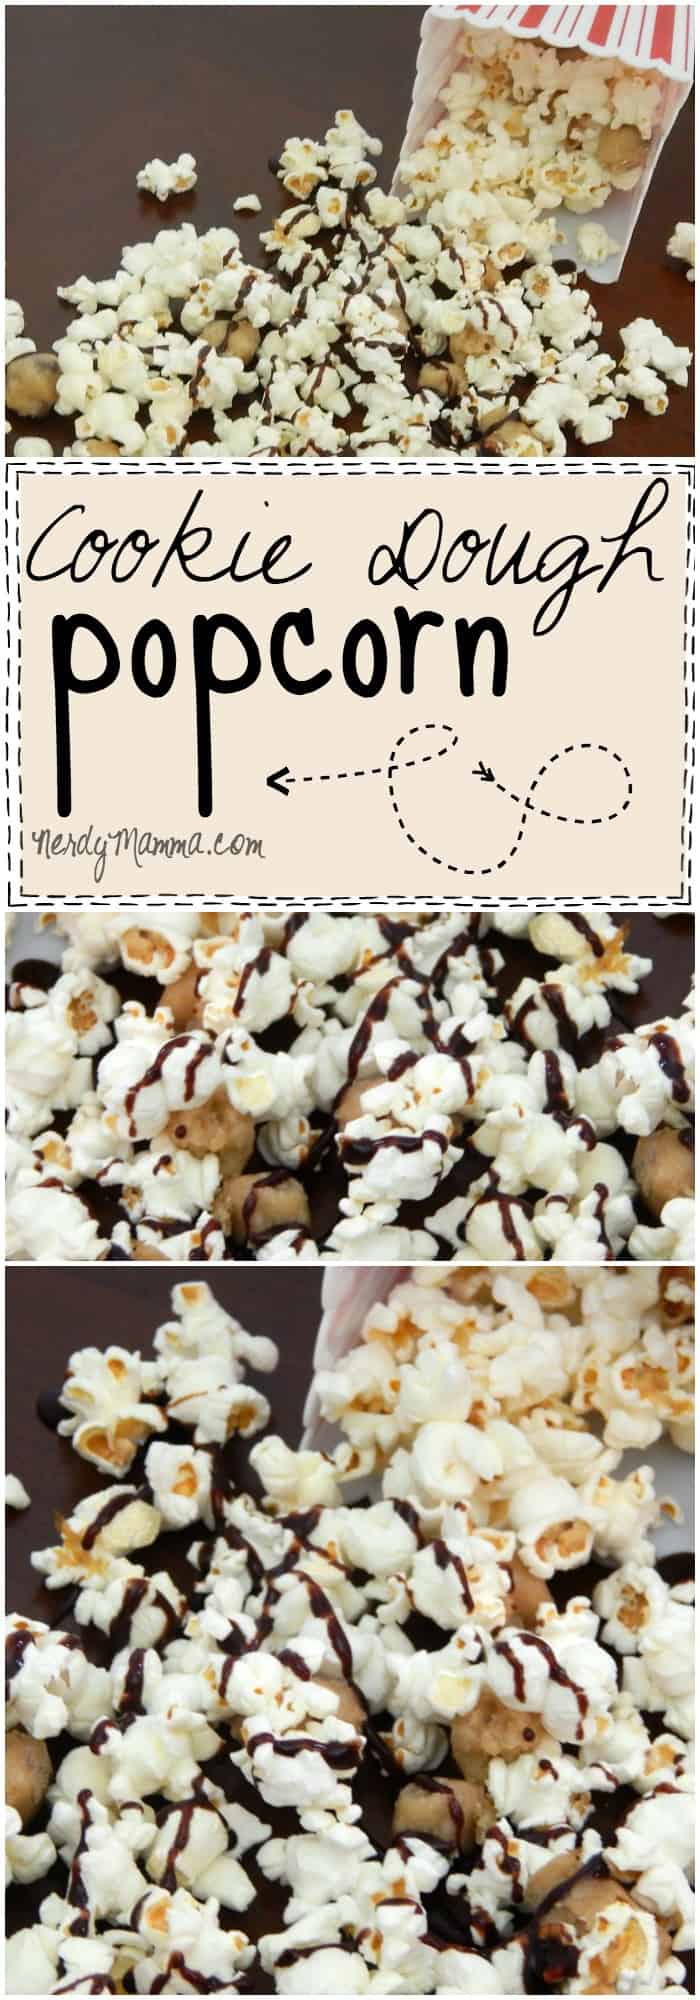 This recipe for Cookie Dough popcorn is so freakin' easy! I love it! Just afraid it might be so good I won't share...heh.